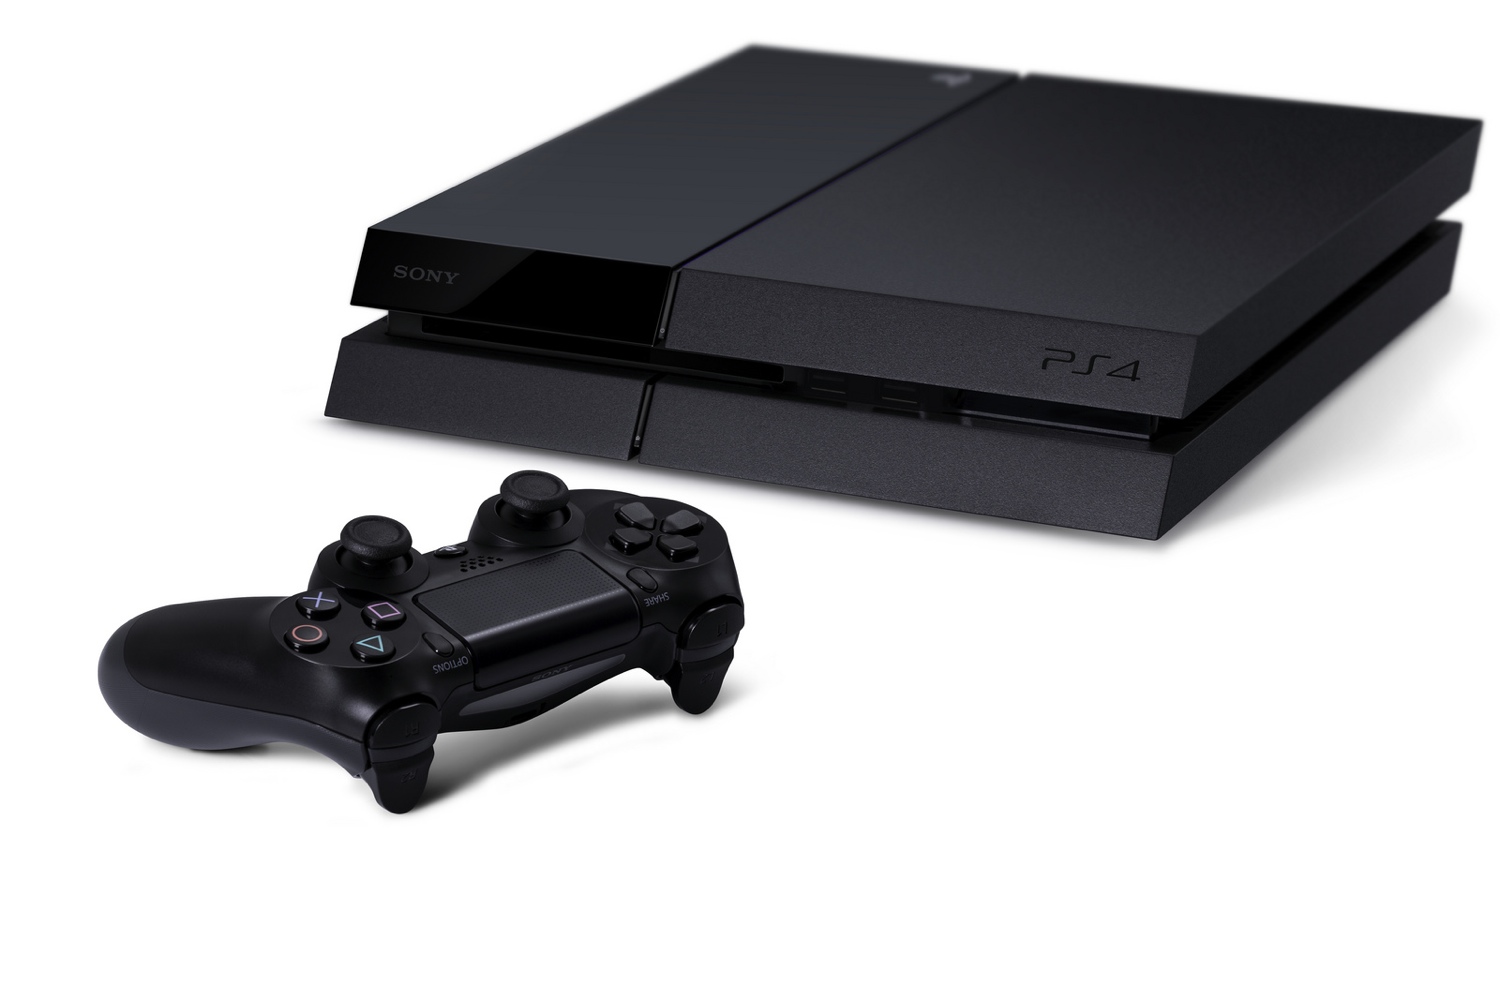 playstation 4 for $199